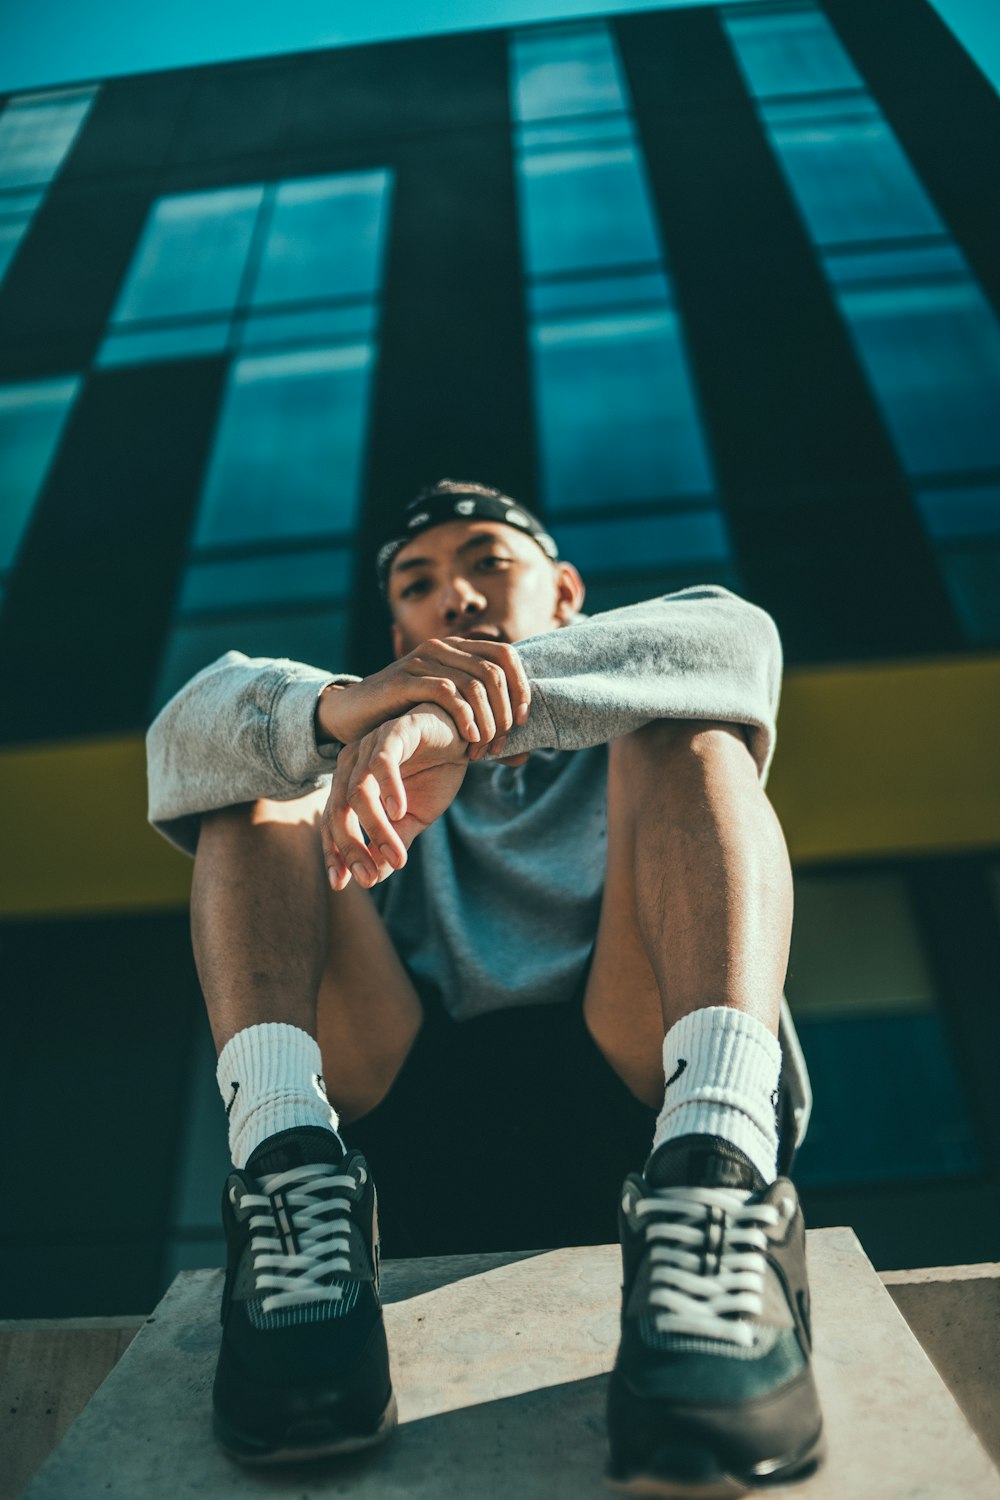 Man in black and white nike shorts and white socks sitting on yellow chair  photo – Free Human Image on Unsplash